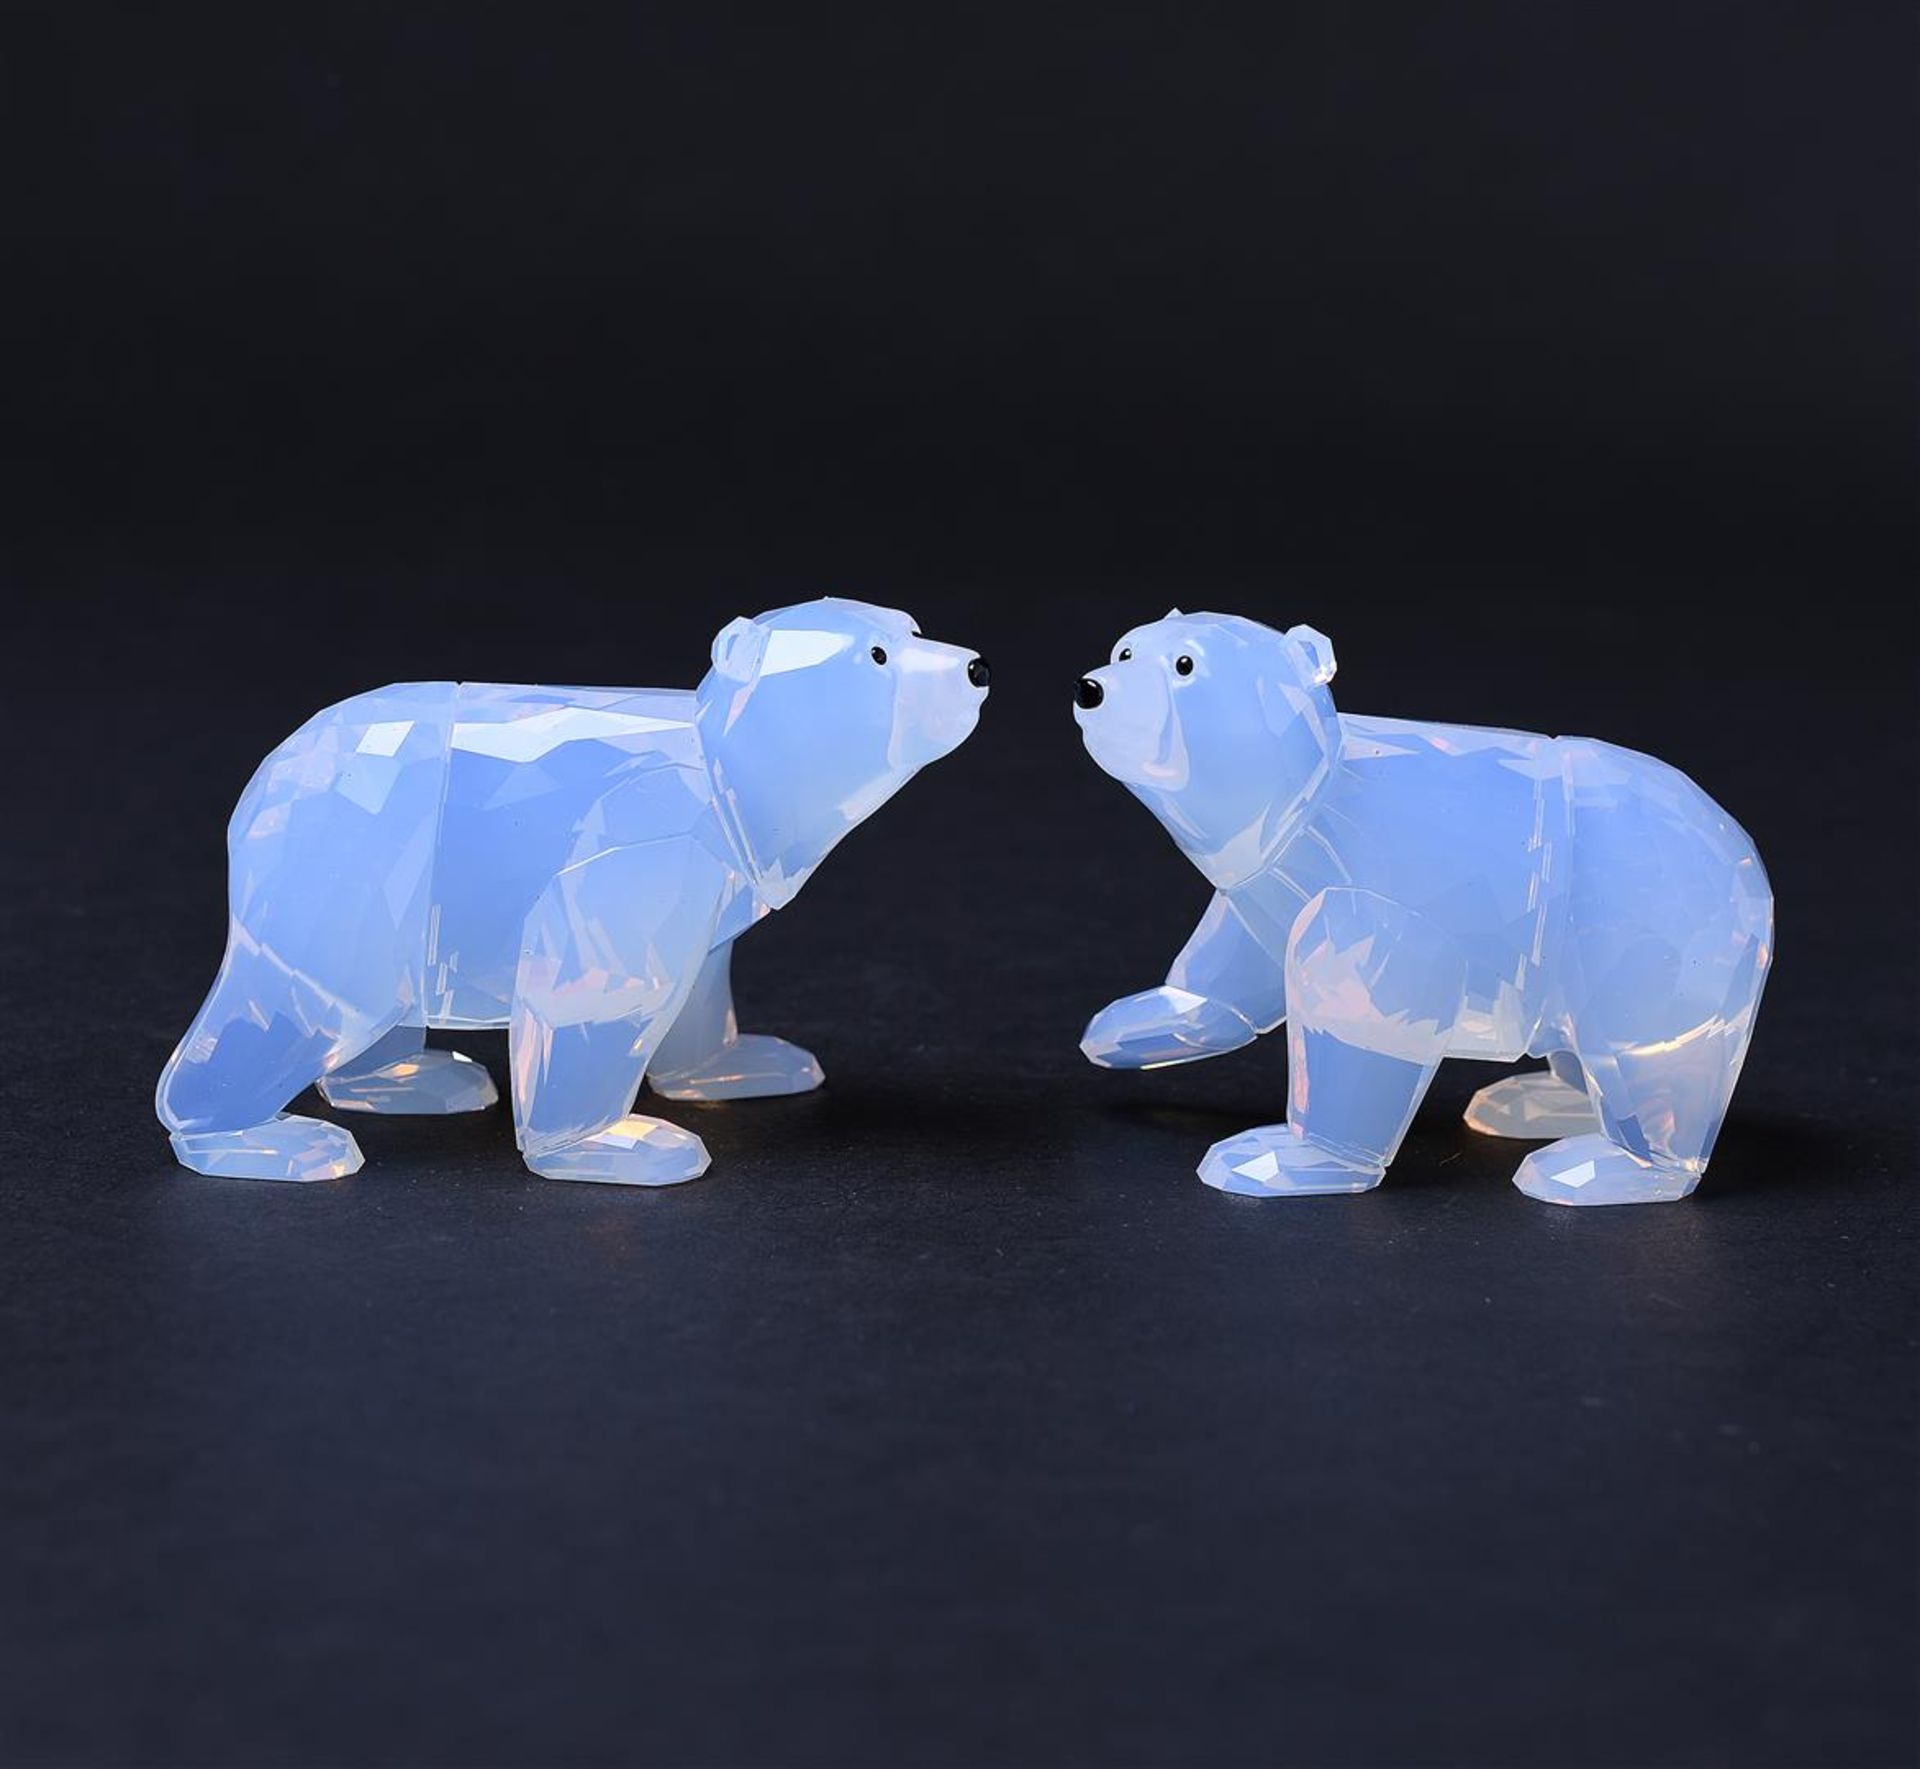 Swarovski SCS, Annual Edition 2011 - Arctic Bear Boy White Opal, Year of Edition 2011 ,1080774. Incl - Image 2 of 5